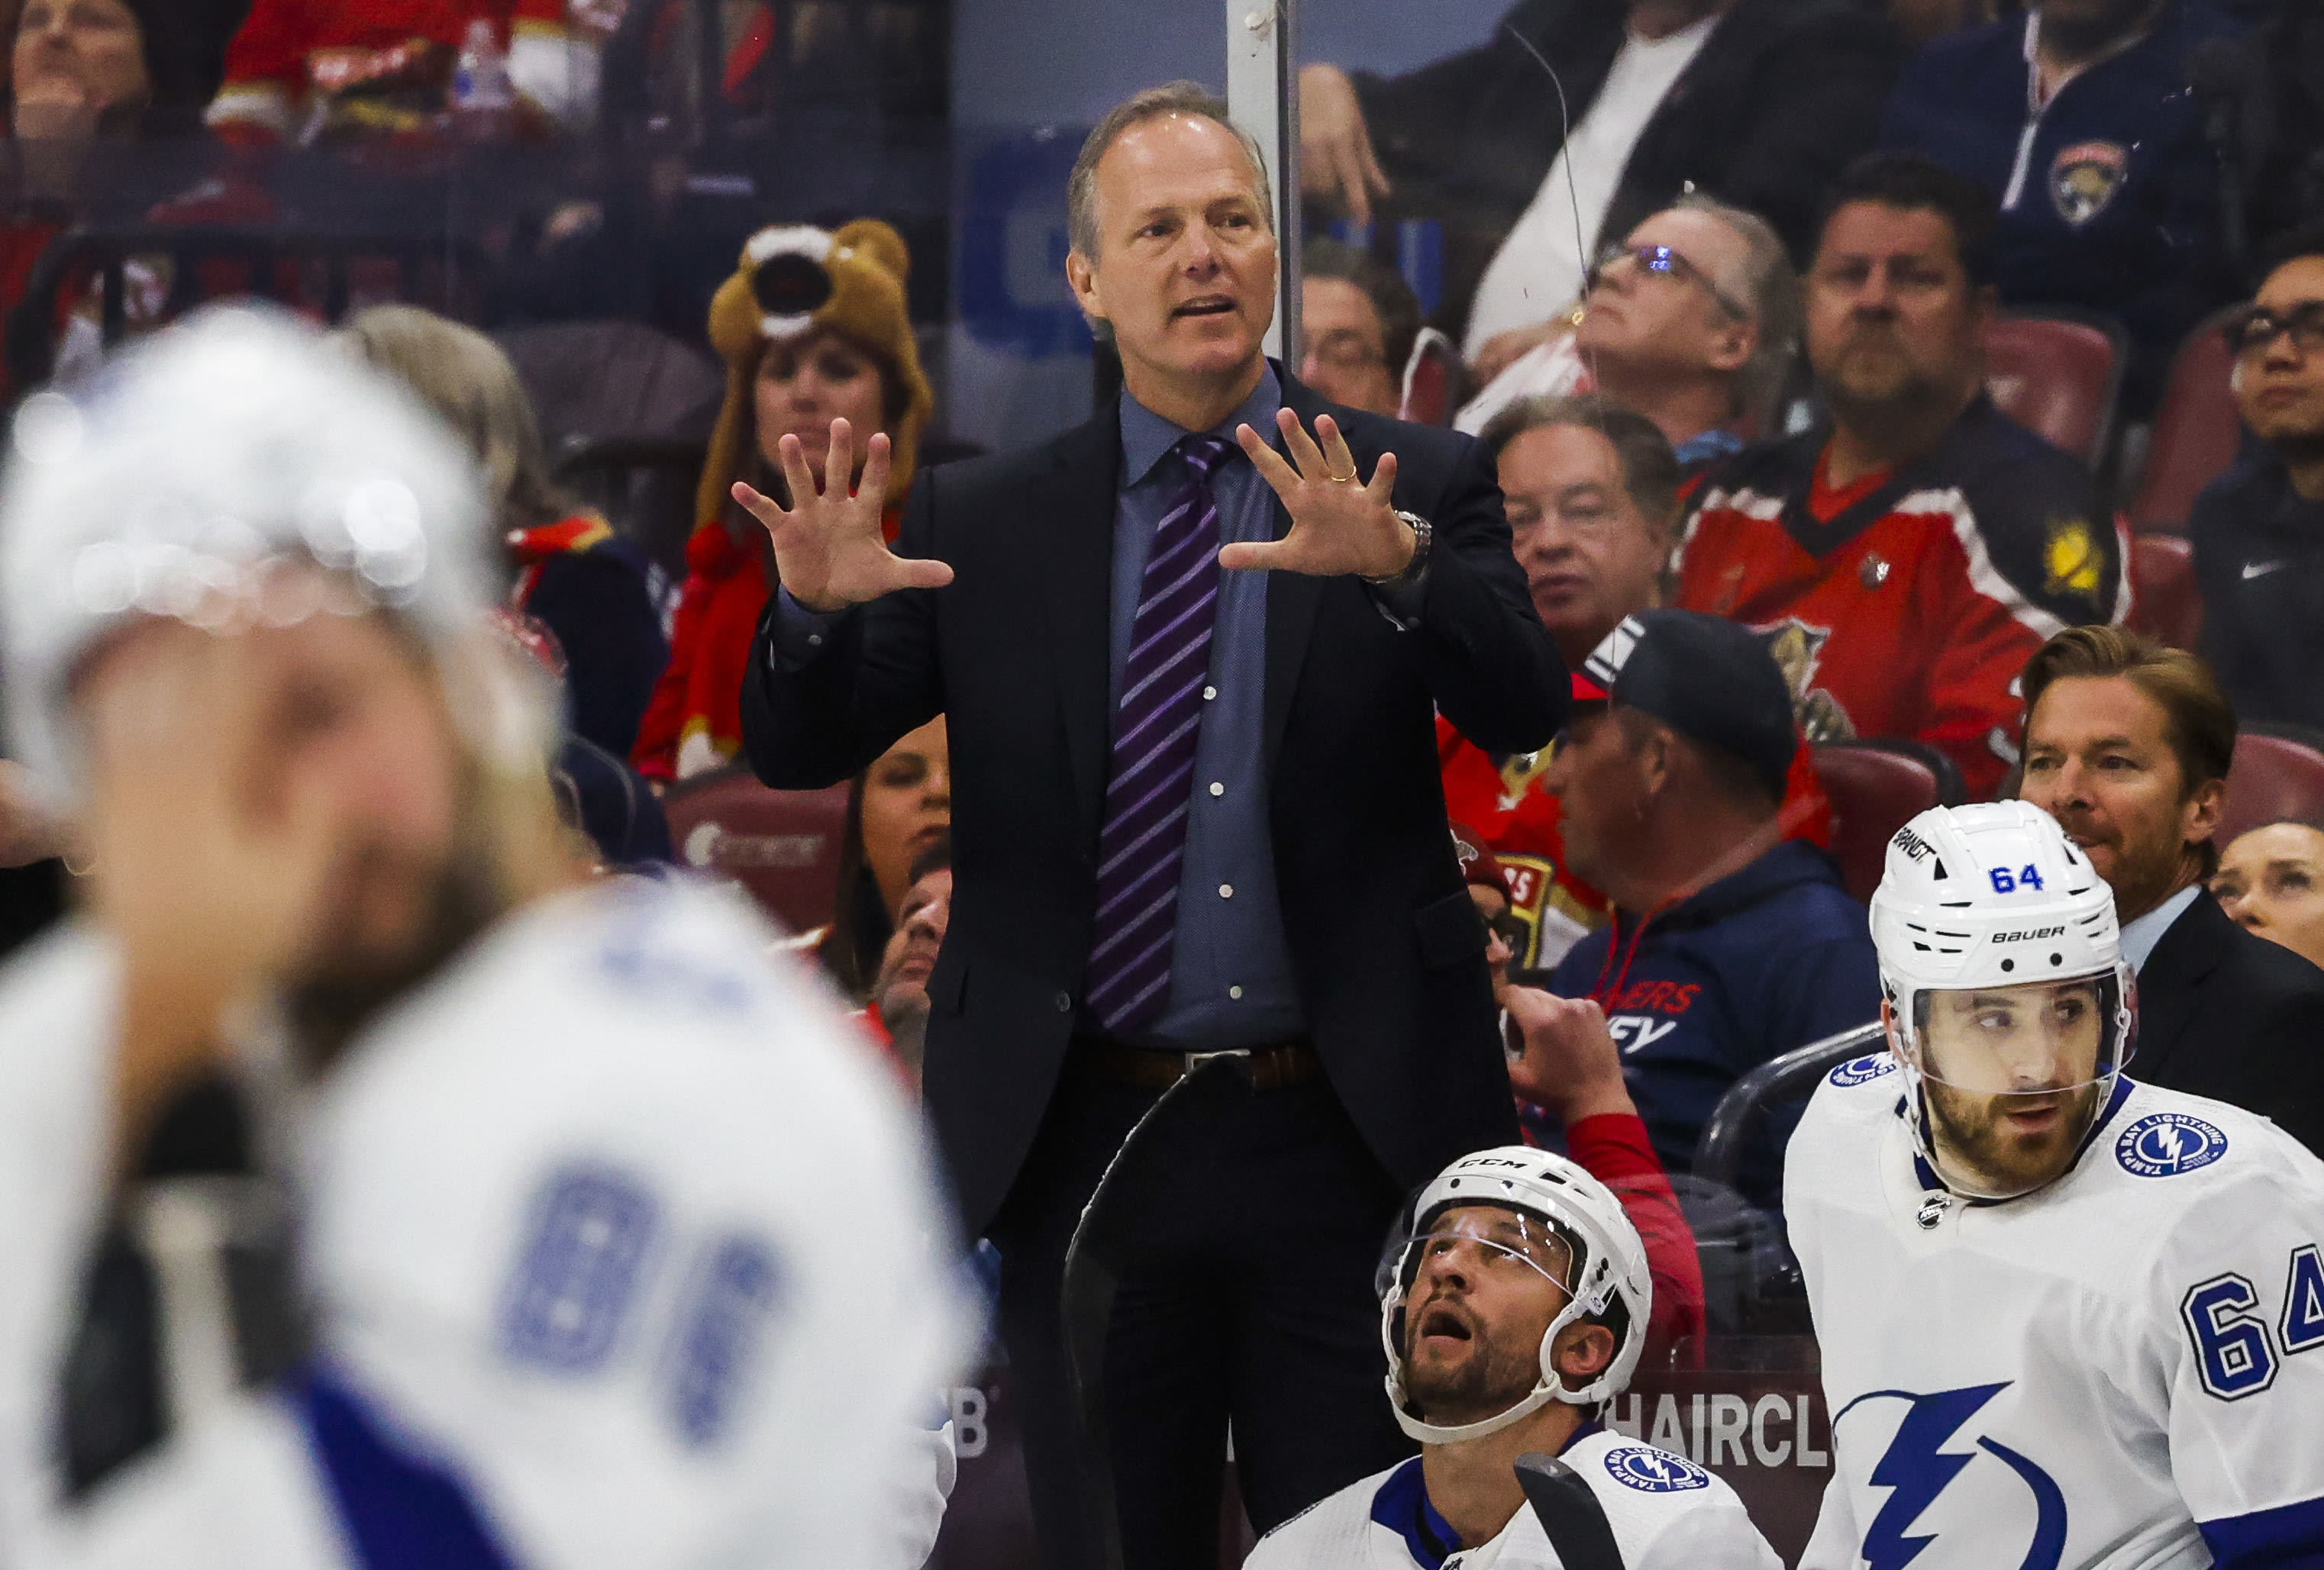 Here’s what we know about Lightning coach Jon Cooper’s contract status